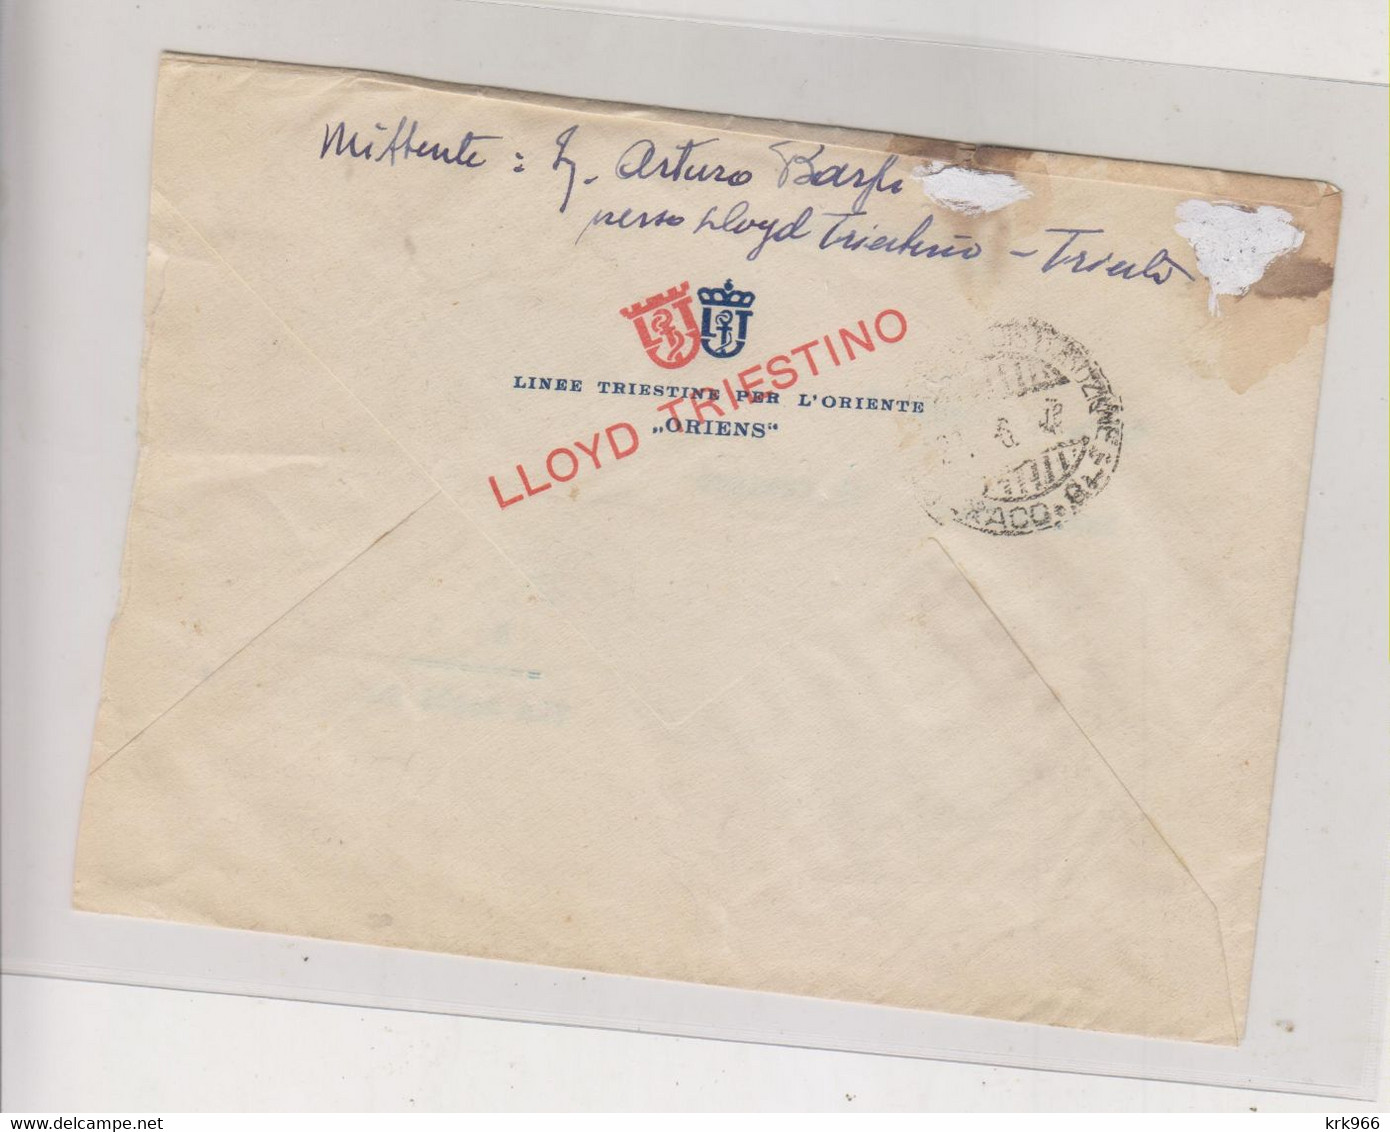 ITALY TRIESTE A 1947  AMG-VG Nice Registered  Cover - Poststempel